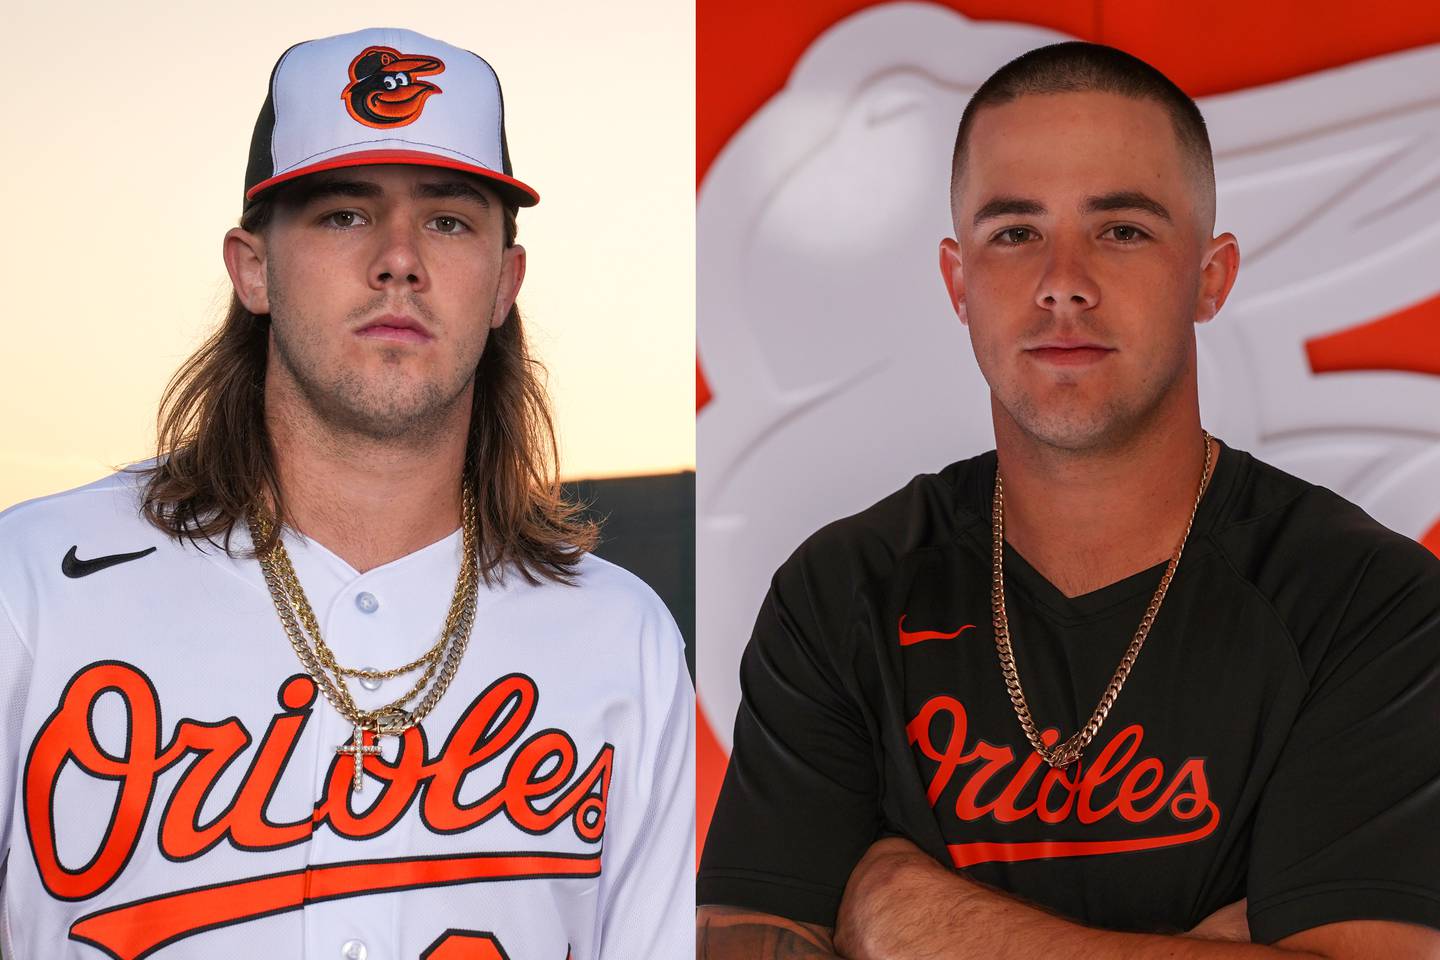 This photo shows before-and-after shots of Orioles pitcher DL Hall. In the image on the left, he has long hair coming out of his Orioles hat. In the image on the right, he has a short hair style.